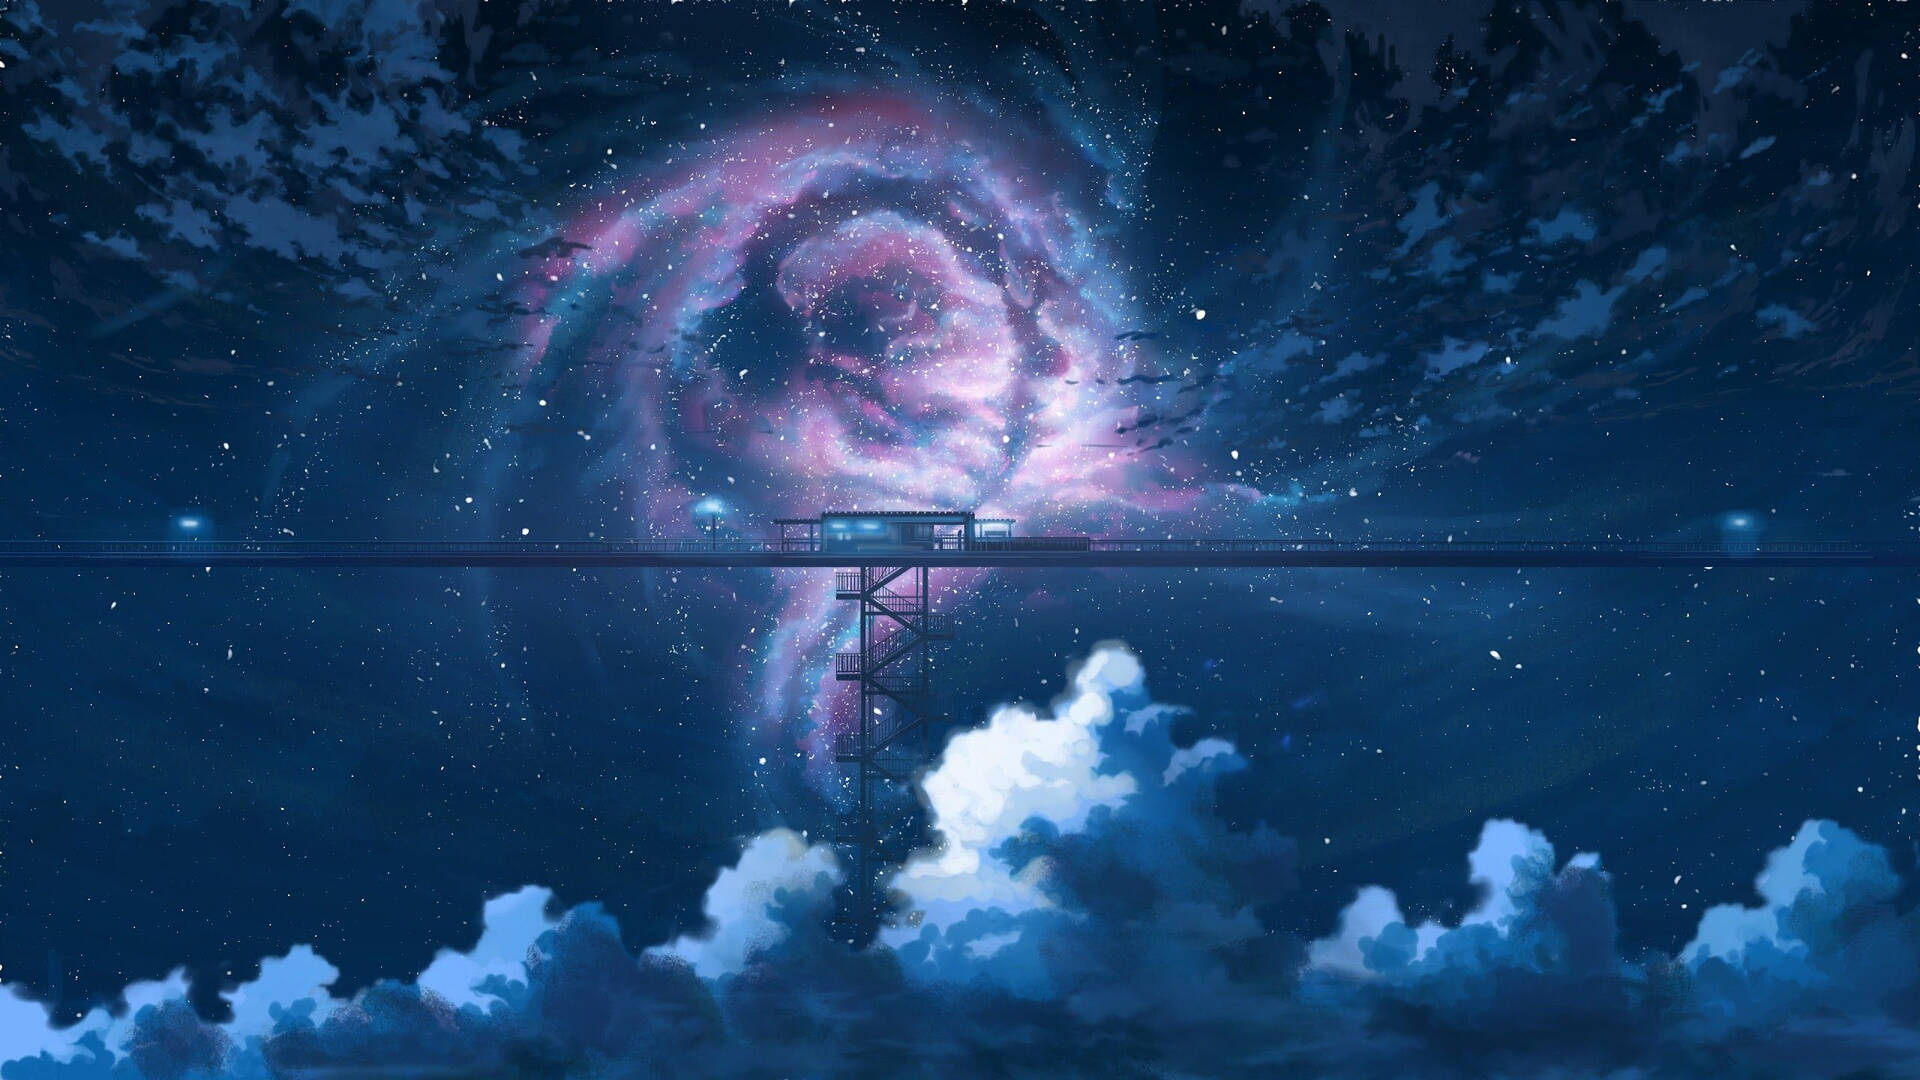 Cool Galaxy Magical Train Station Background